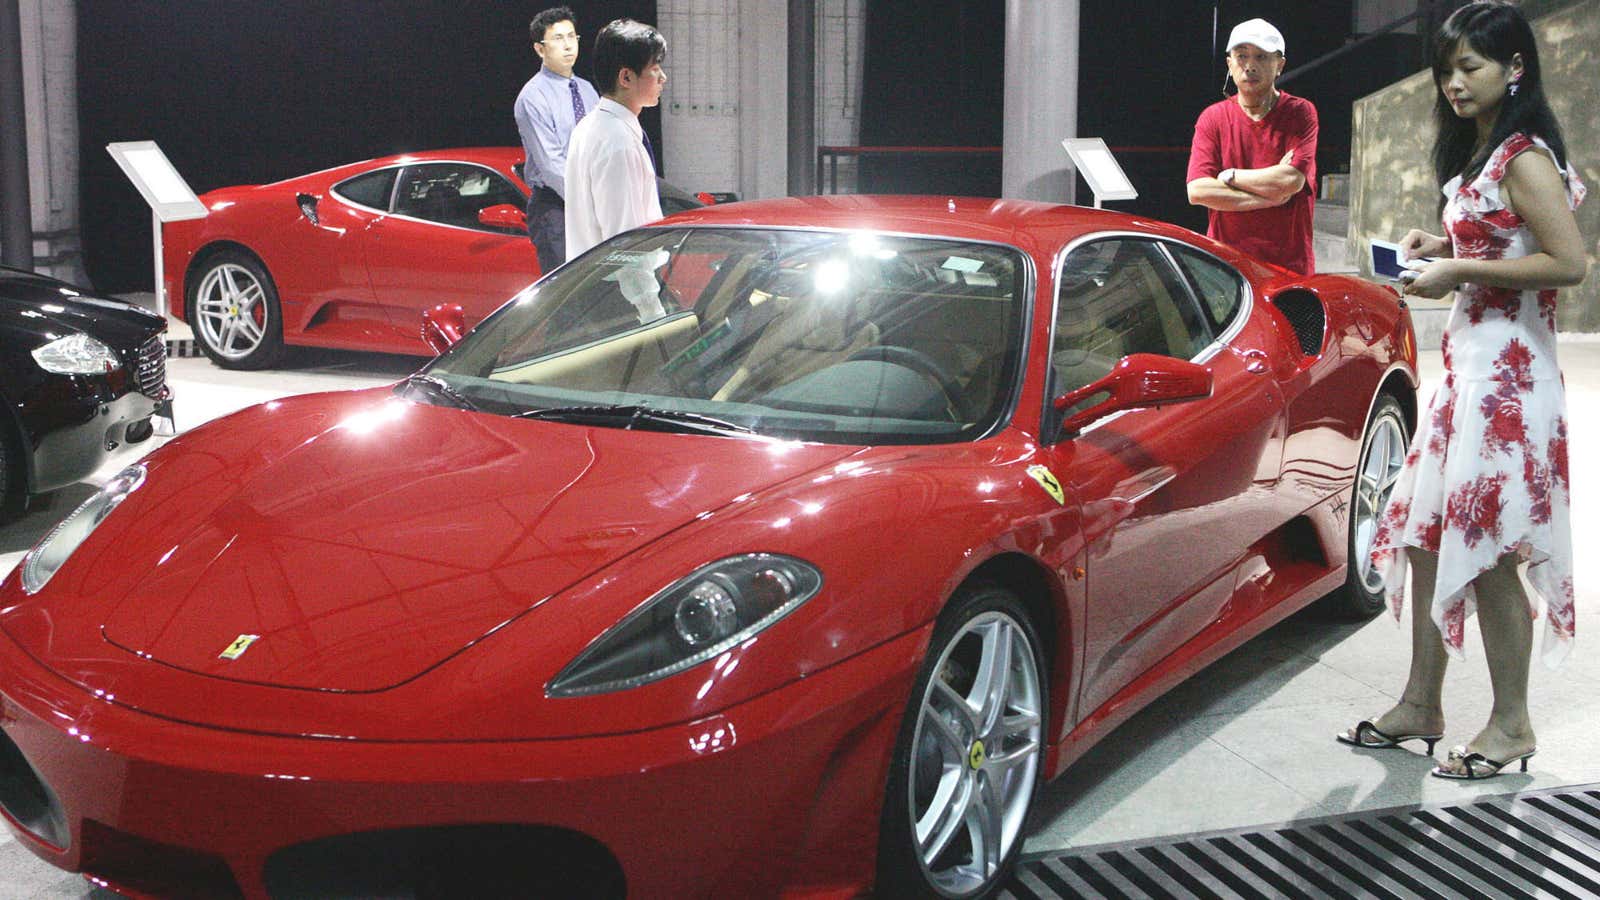 A Ferrari at an auto show in Beijing. Is too much bling and corruption among politicians hurting investor confidence?